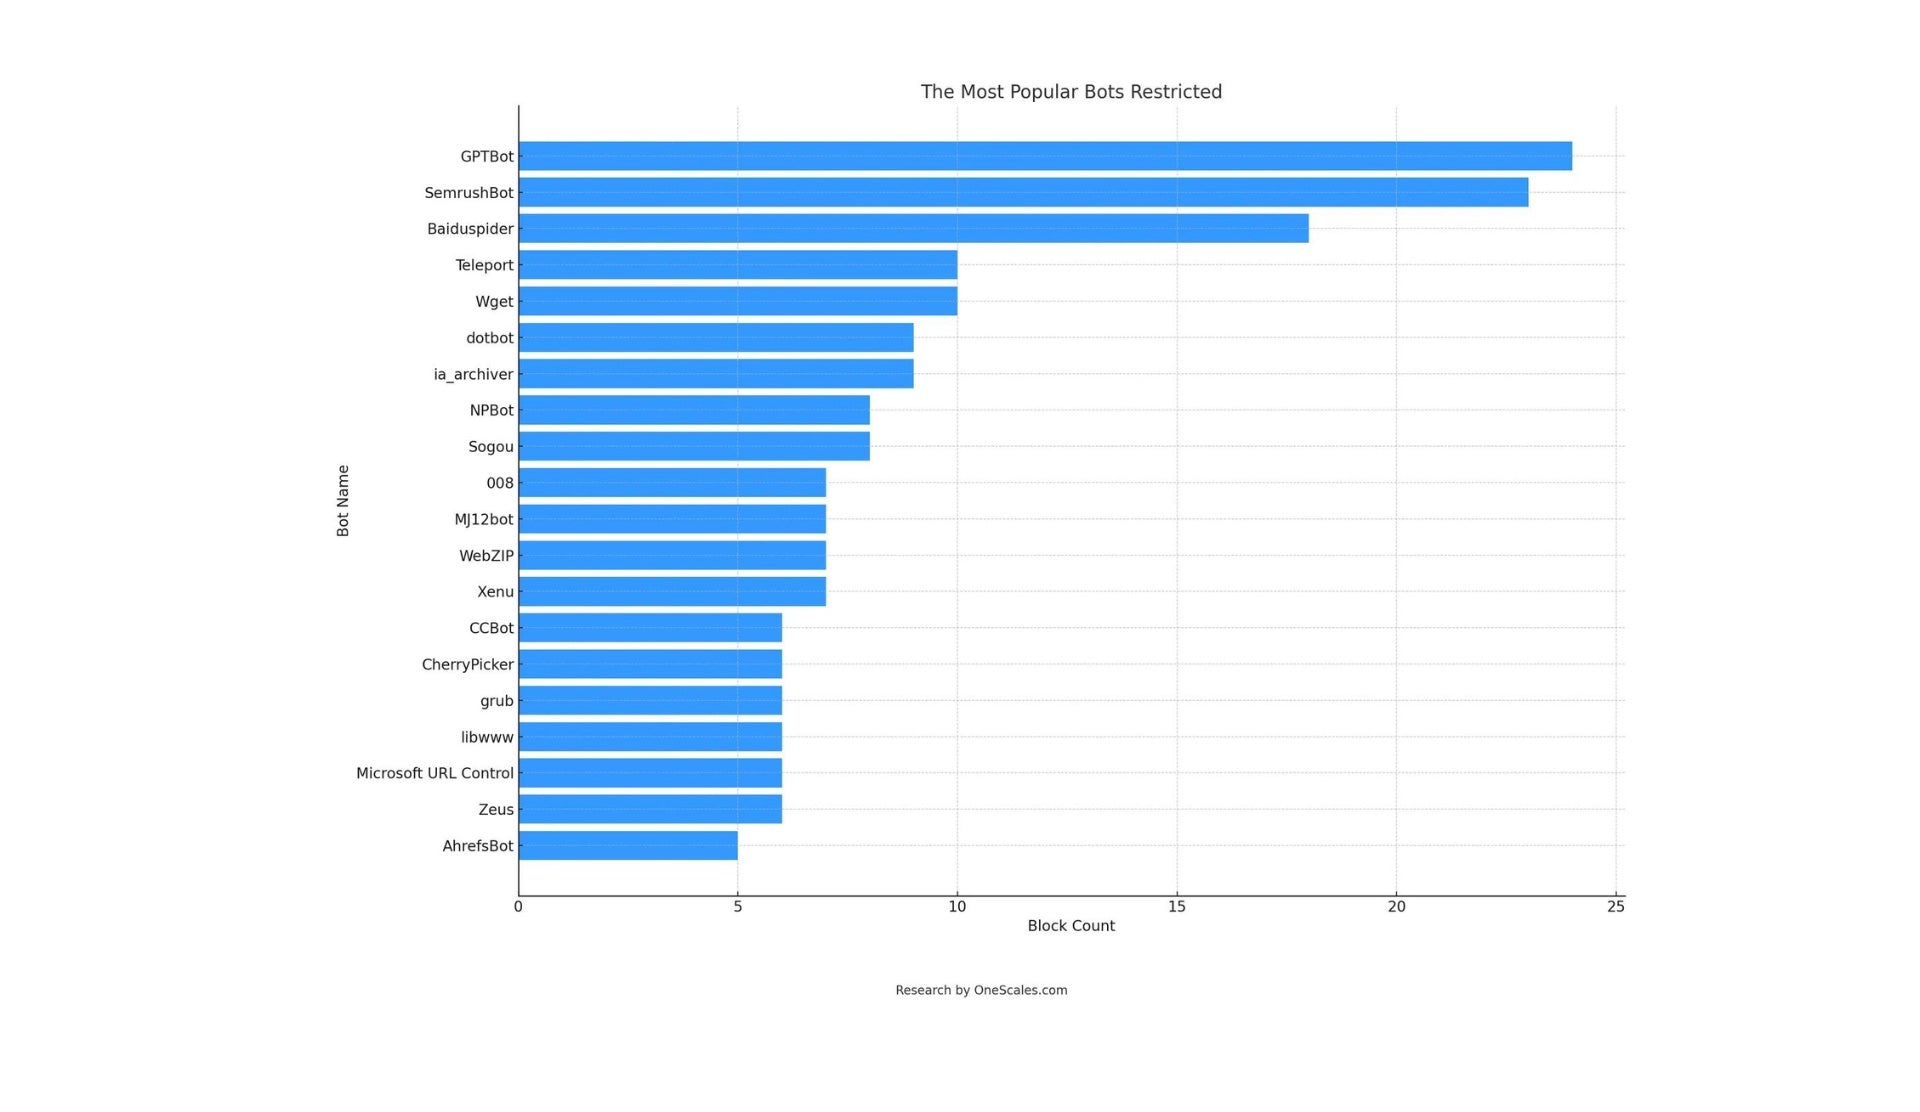 The Bot Blocklist: Who's Banned from The Largest Websites